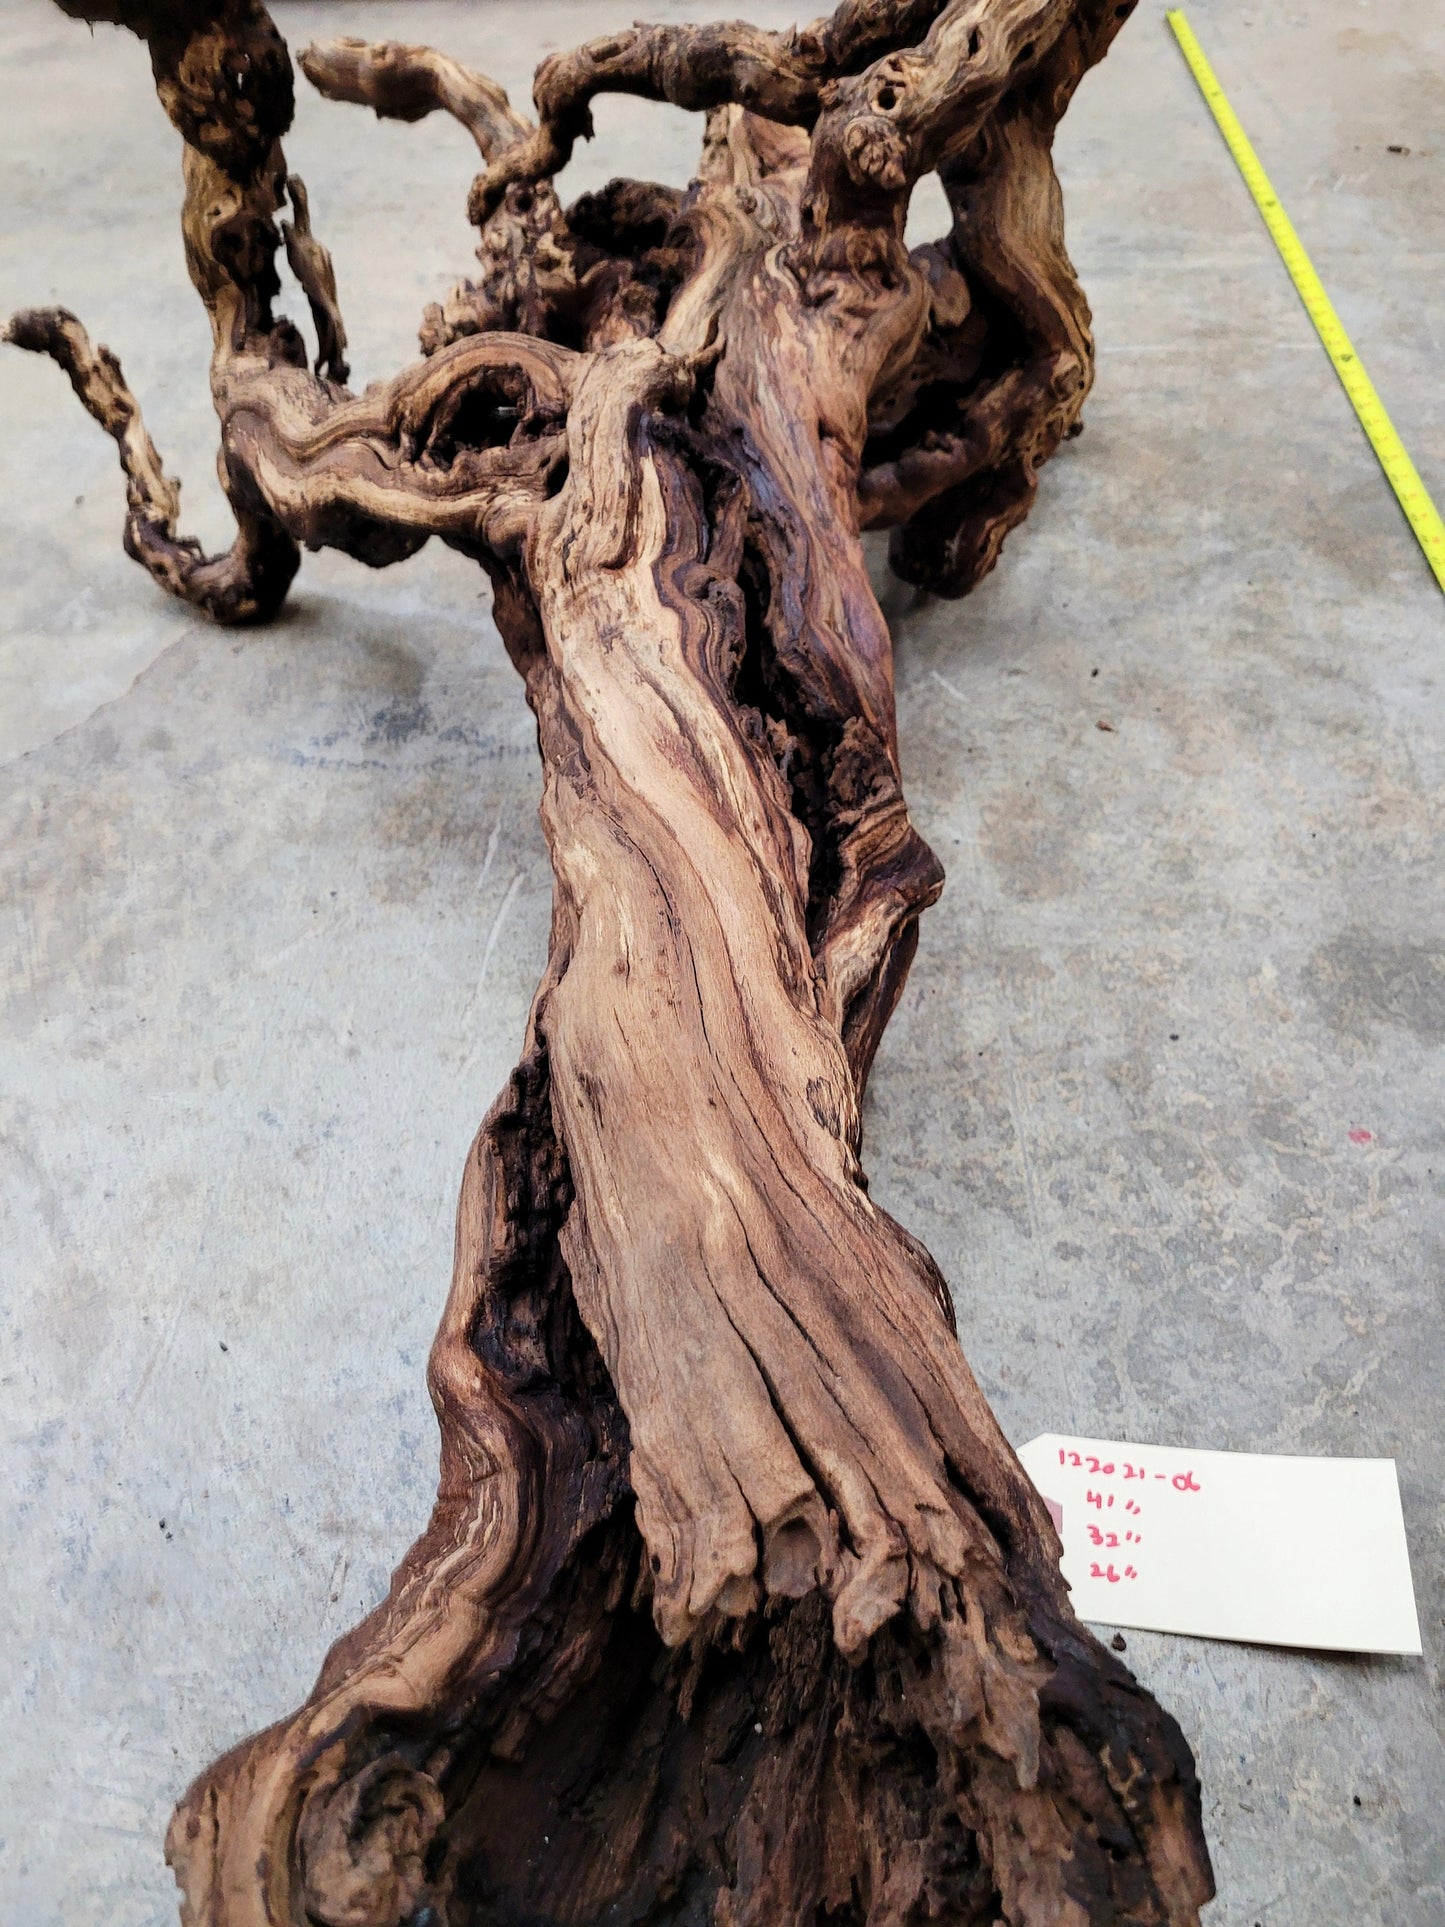 121 Year Old Grape Vine Art From Silver Oak Vineyards retired Napa Zinfandel 100% Recycled + Ready to Ship! 122021-06